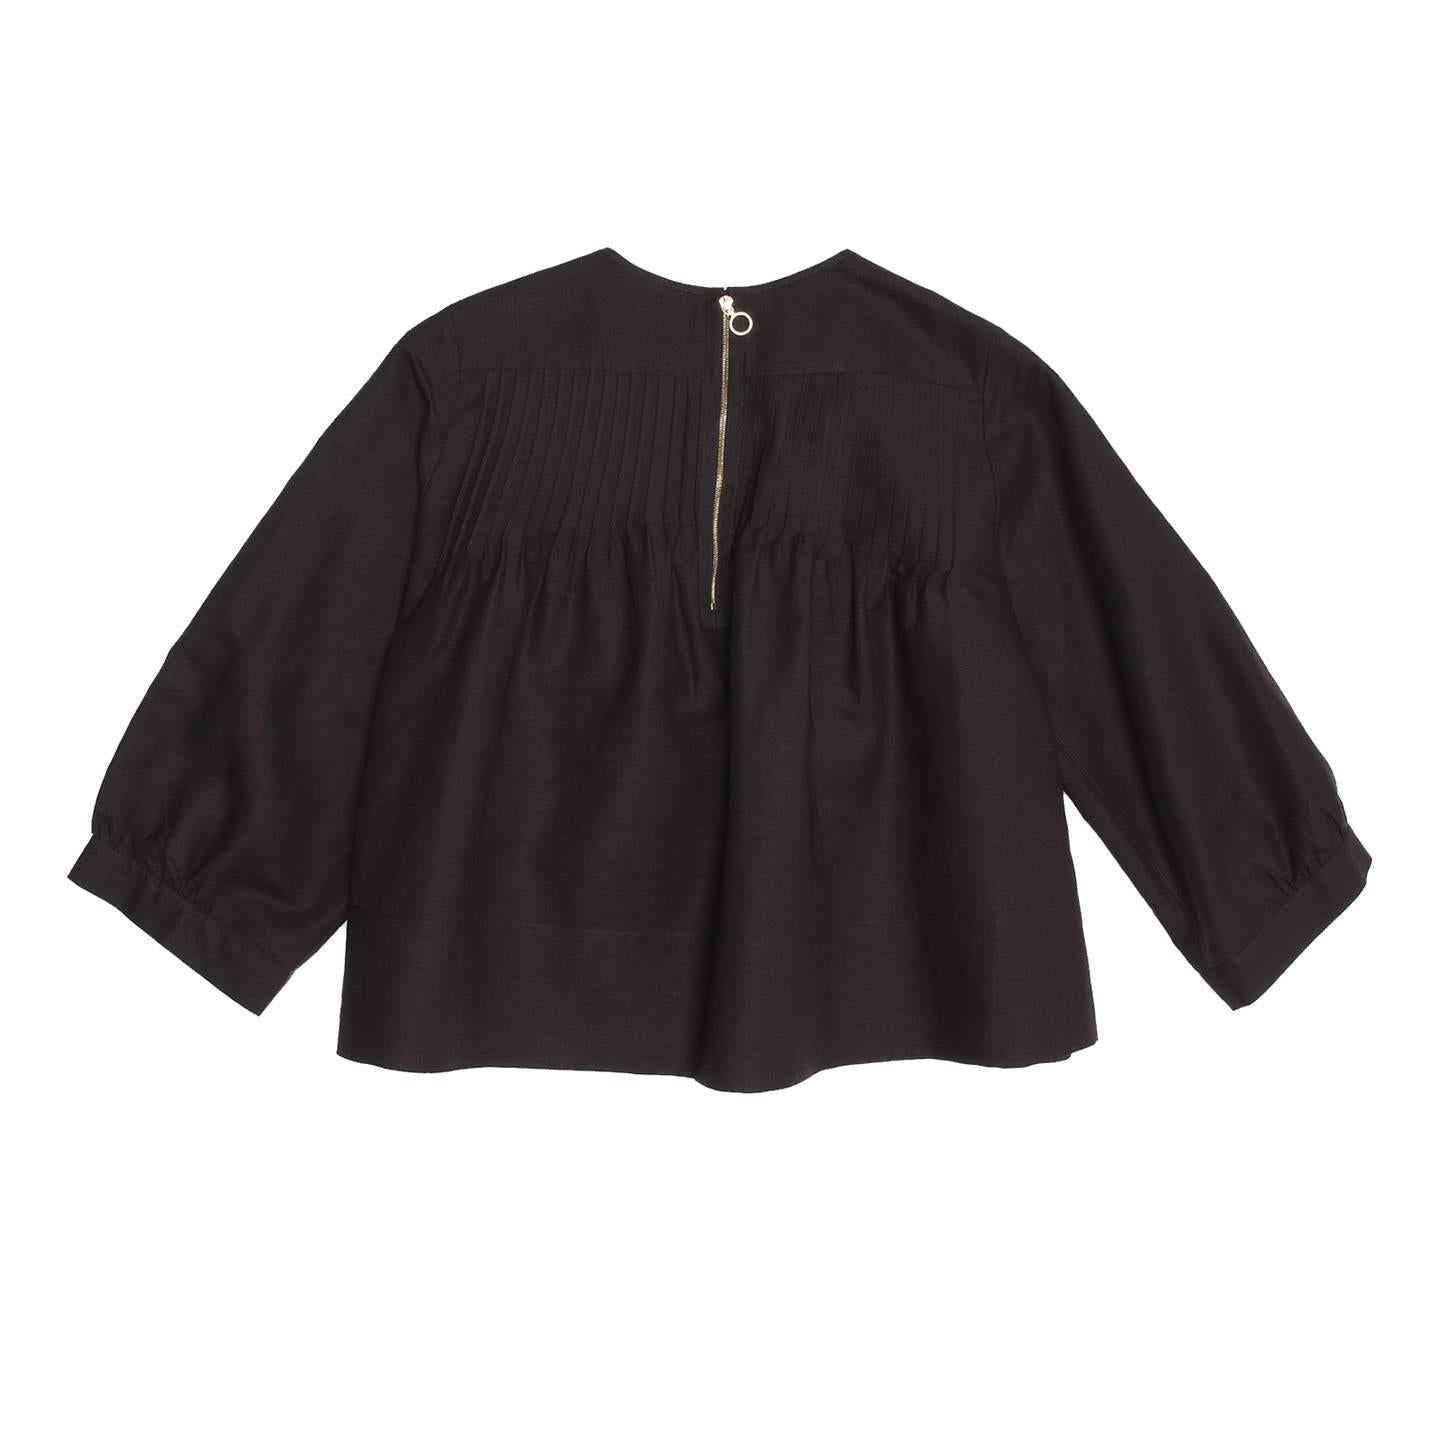 Chloe' Black Linen Top With Ruffles In Excellent Condition For Sale In Brooklyn, NY